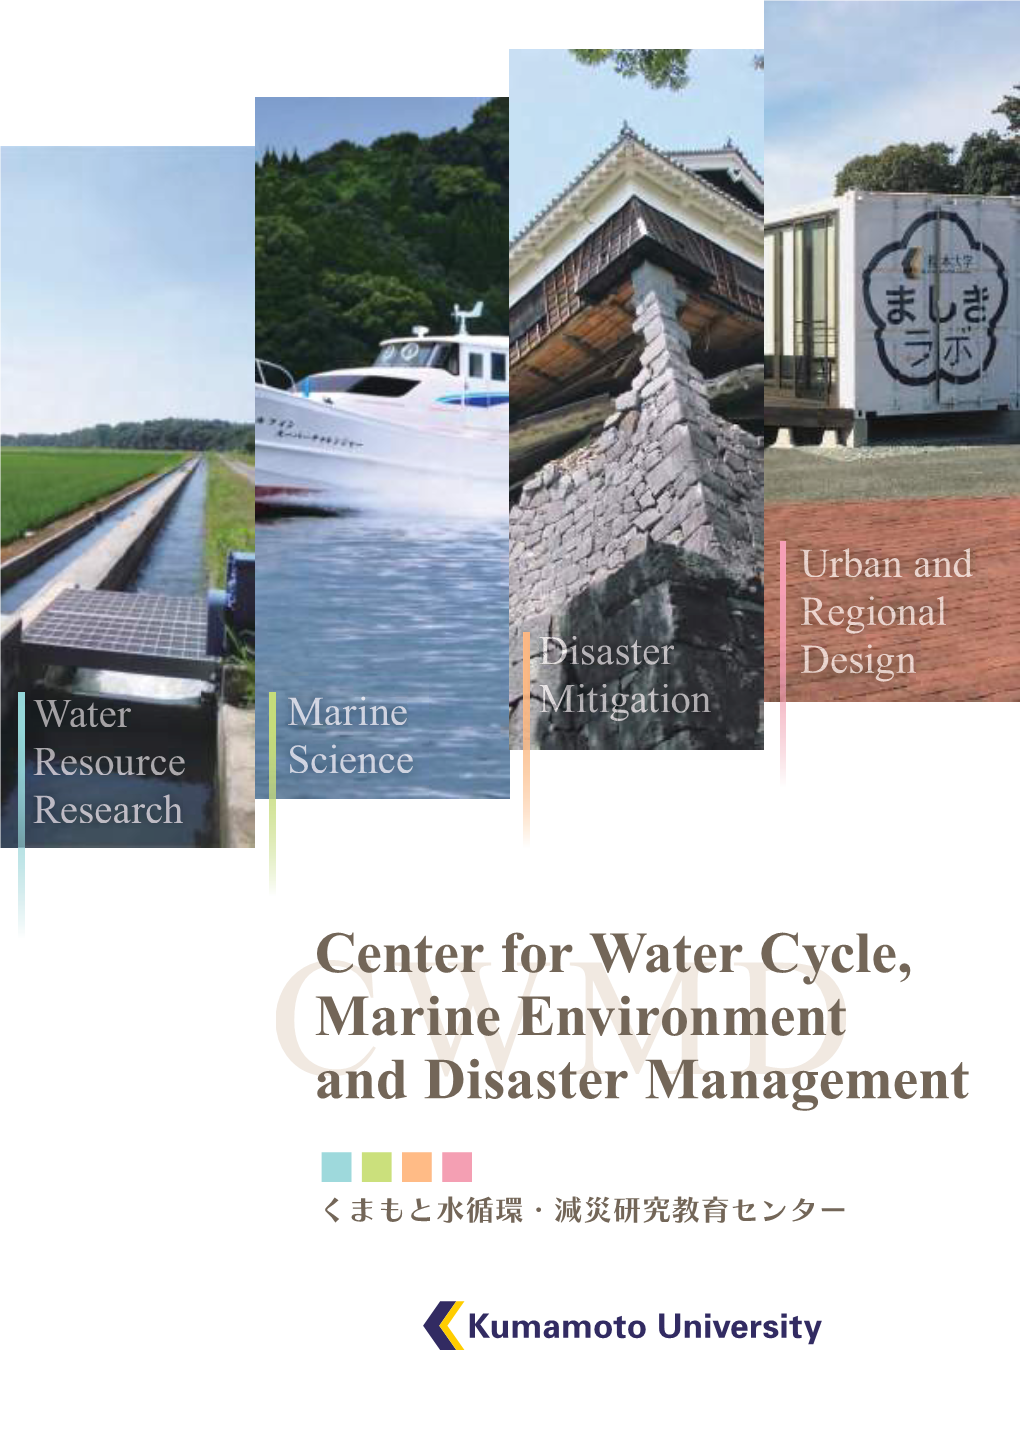 Center for Water Cycle, Marine Environment and Disaster